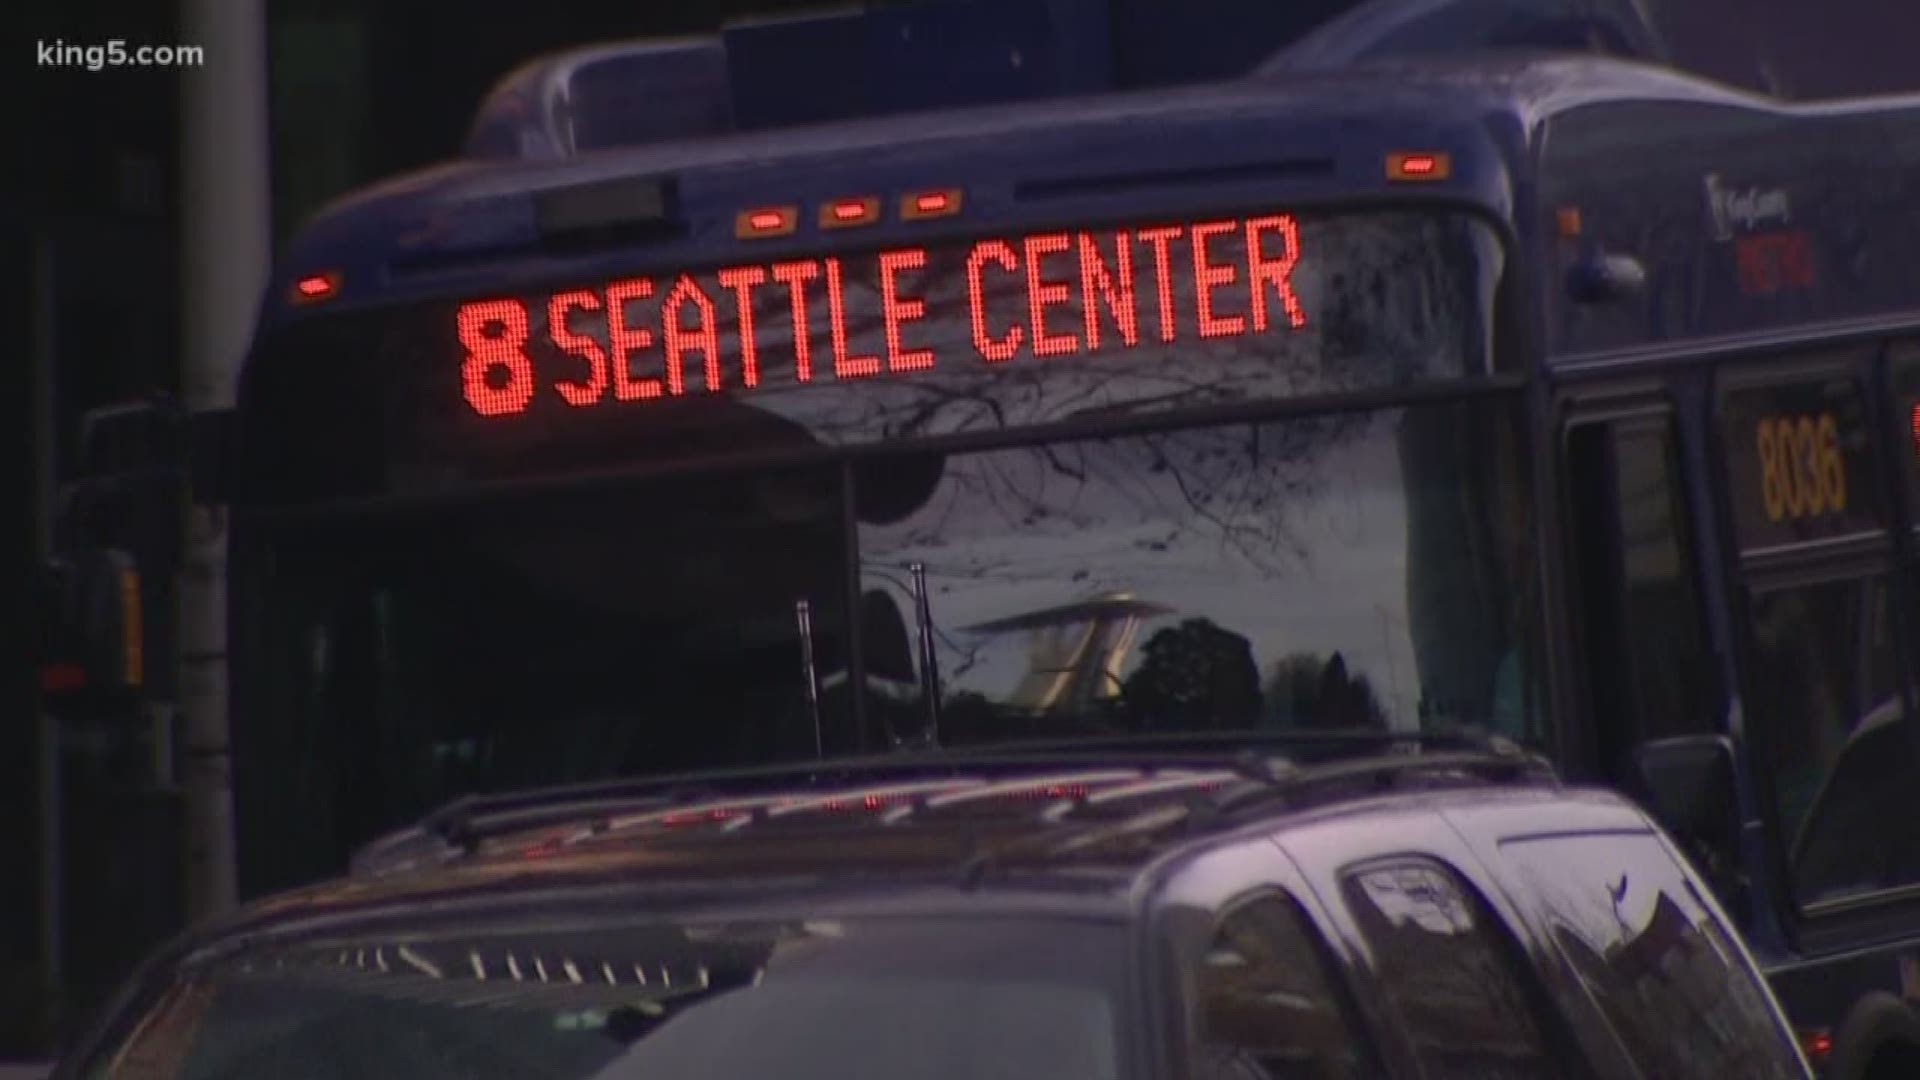 Through this first full week without the Alaskan Way viaduct, officials have been urging drivers to take other transit instead. But we've had a few people reach out, wondering if buses can get so full, to the point of being unsafe. KING 5's Michael Crowe followed up on that for us today with Metro.